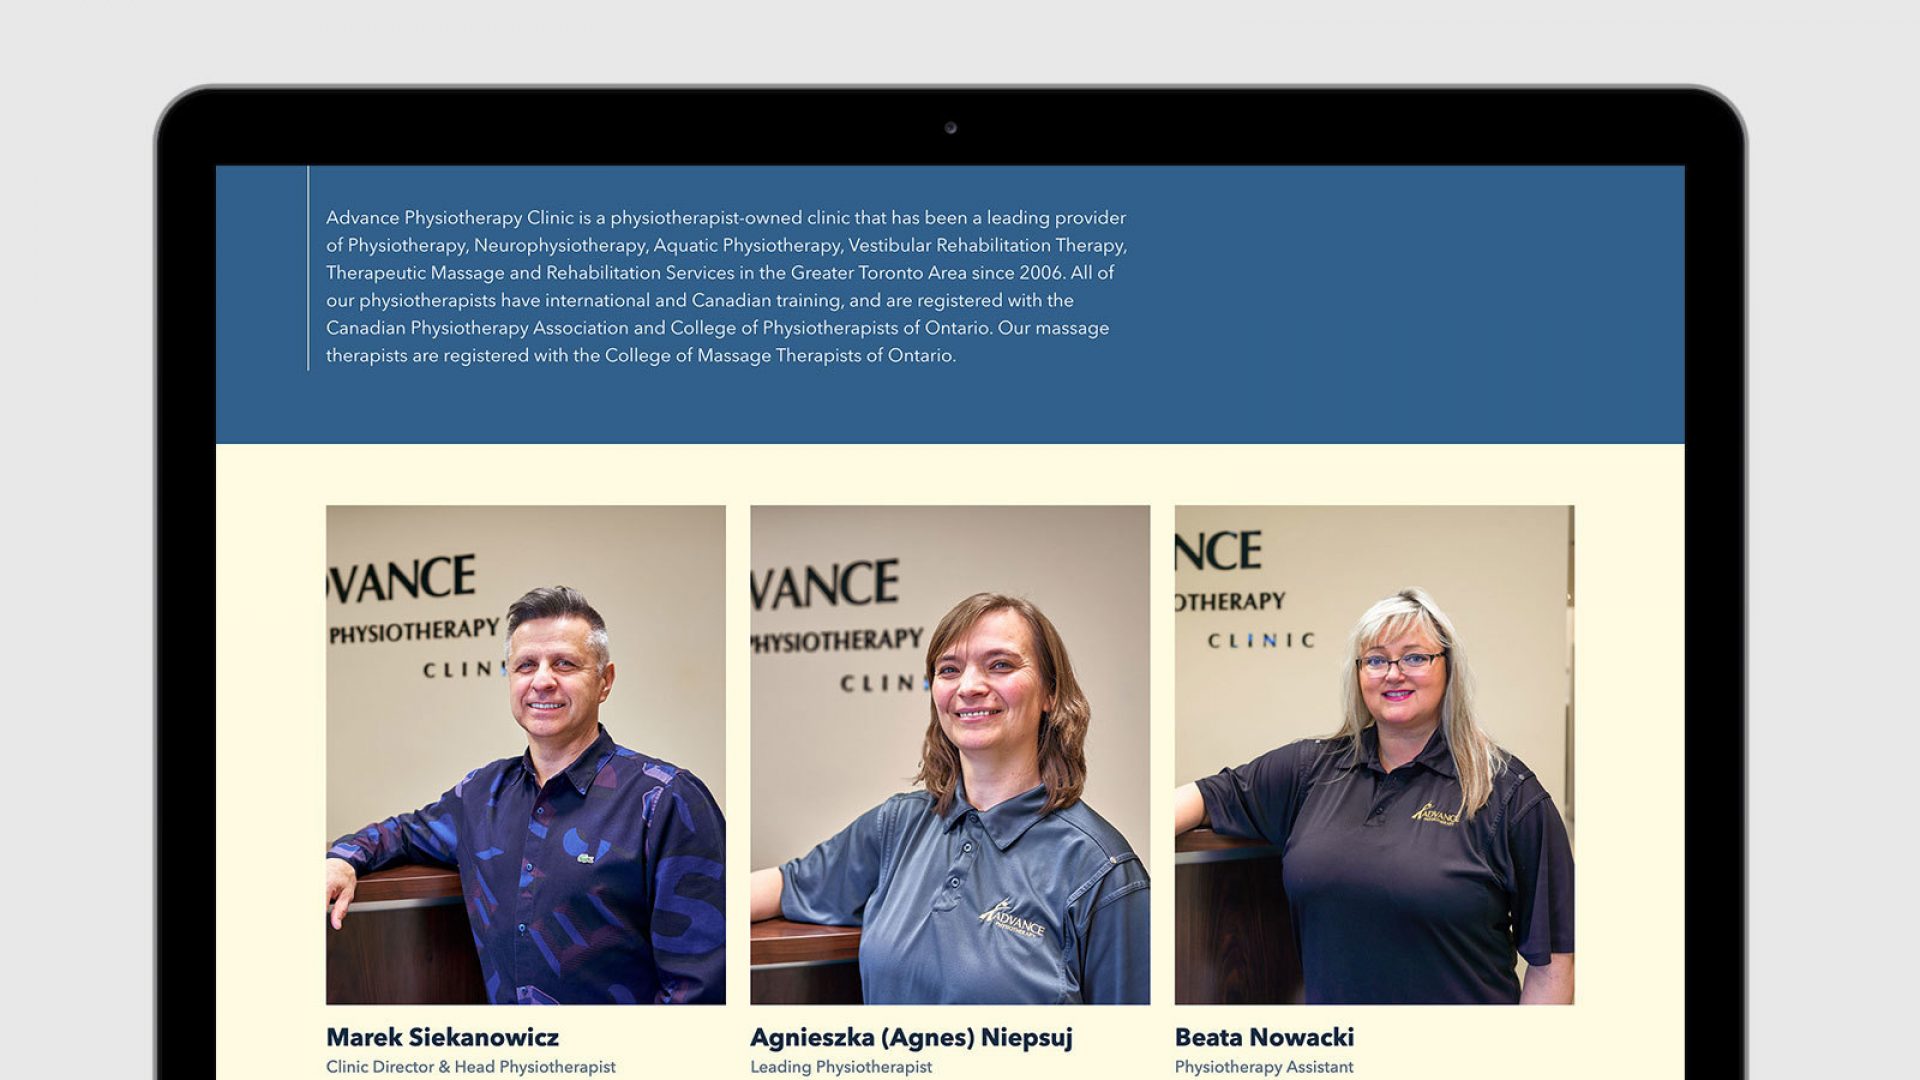 The staff page of Advance Physiotherapy Clinic on a laptop.